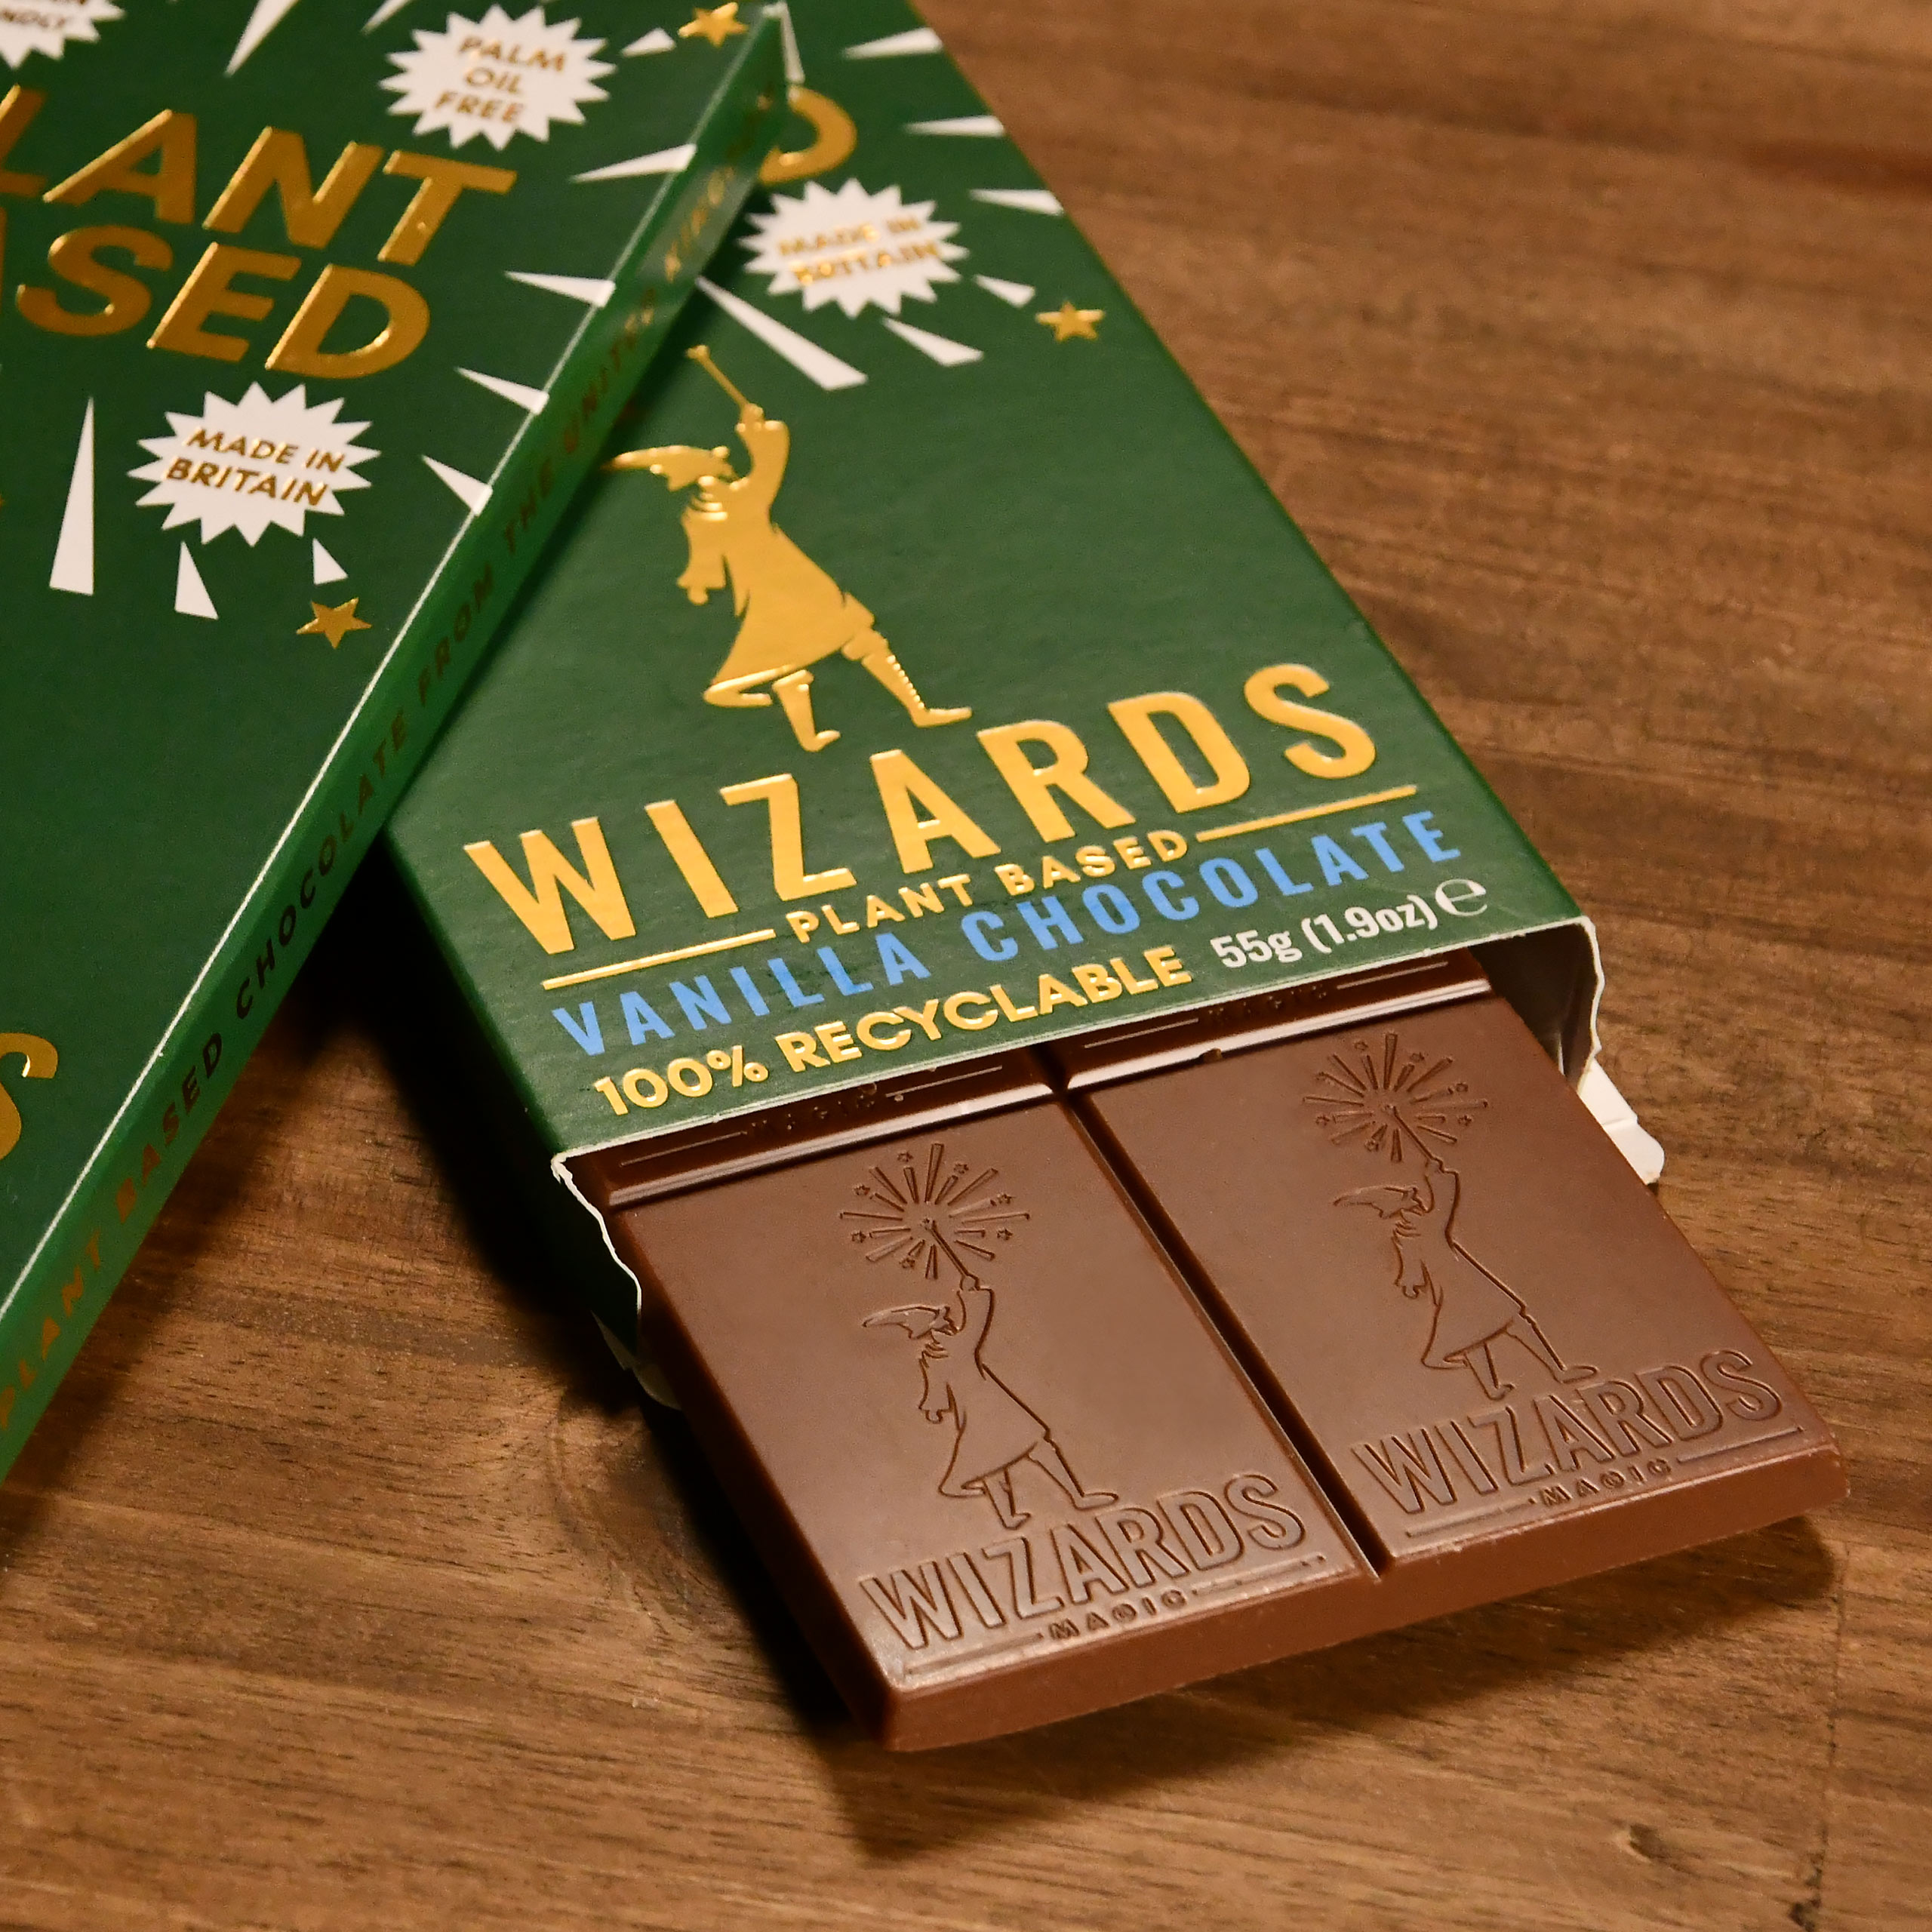 Wizards Magic - Plant Based Selection Chocolate 4 Bars